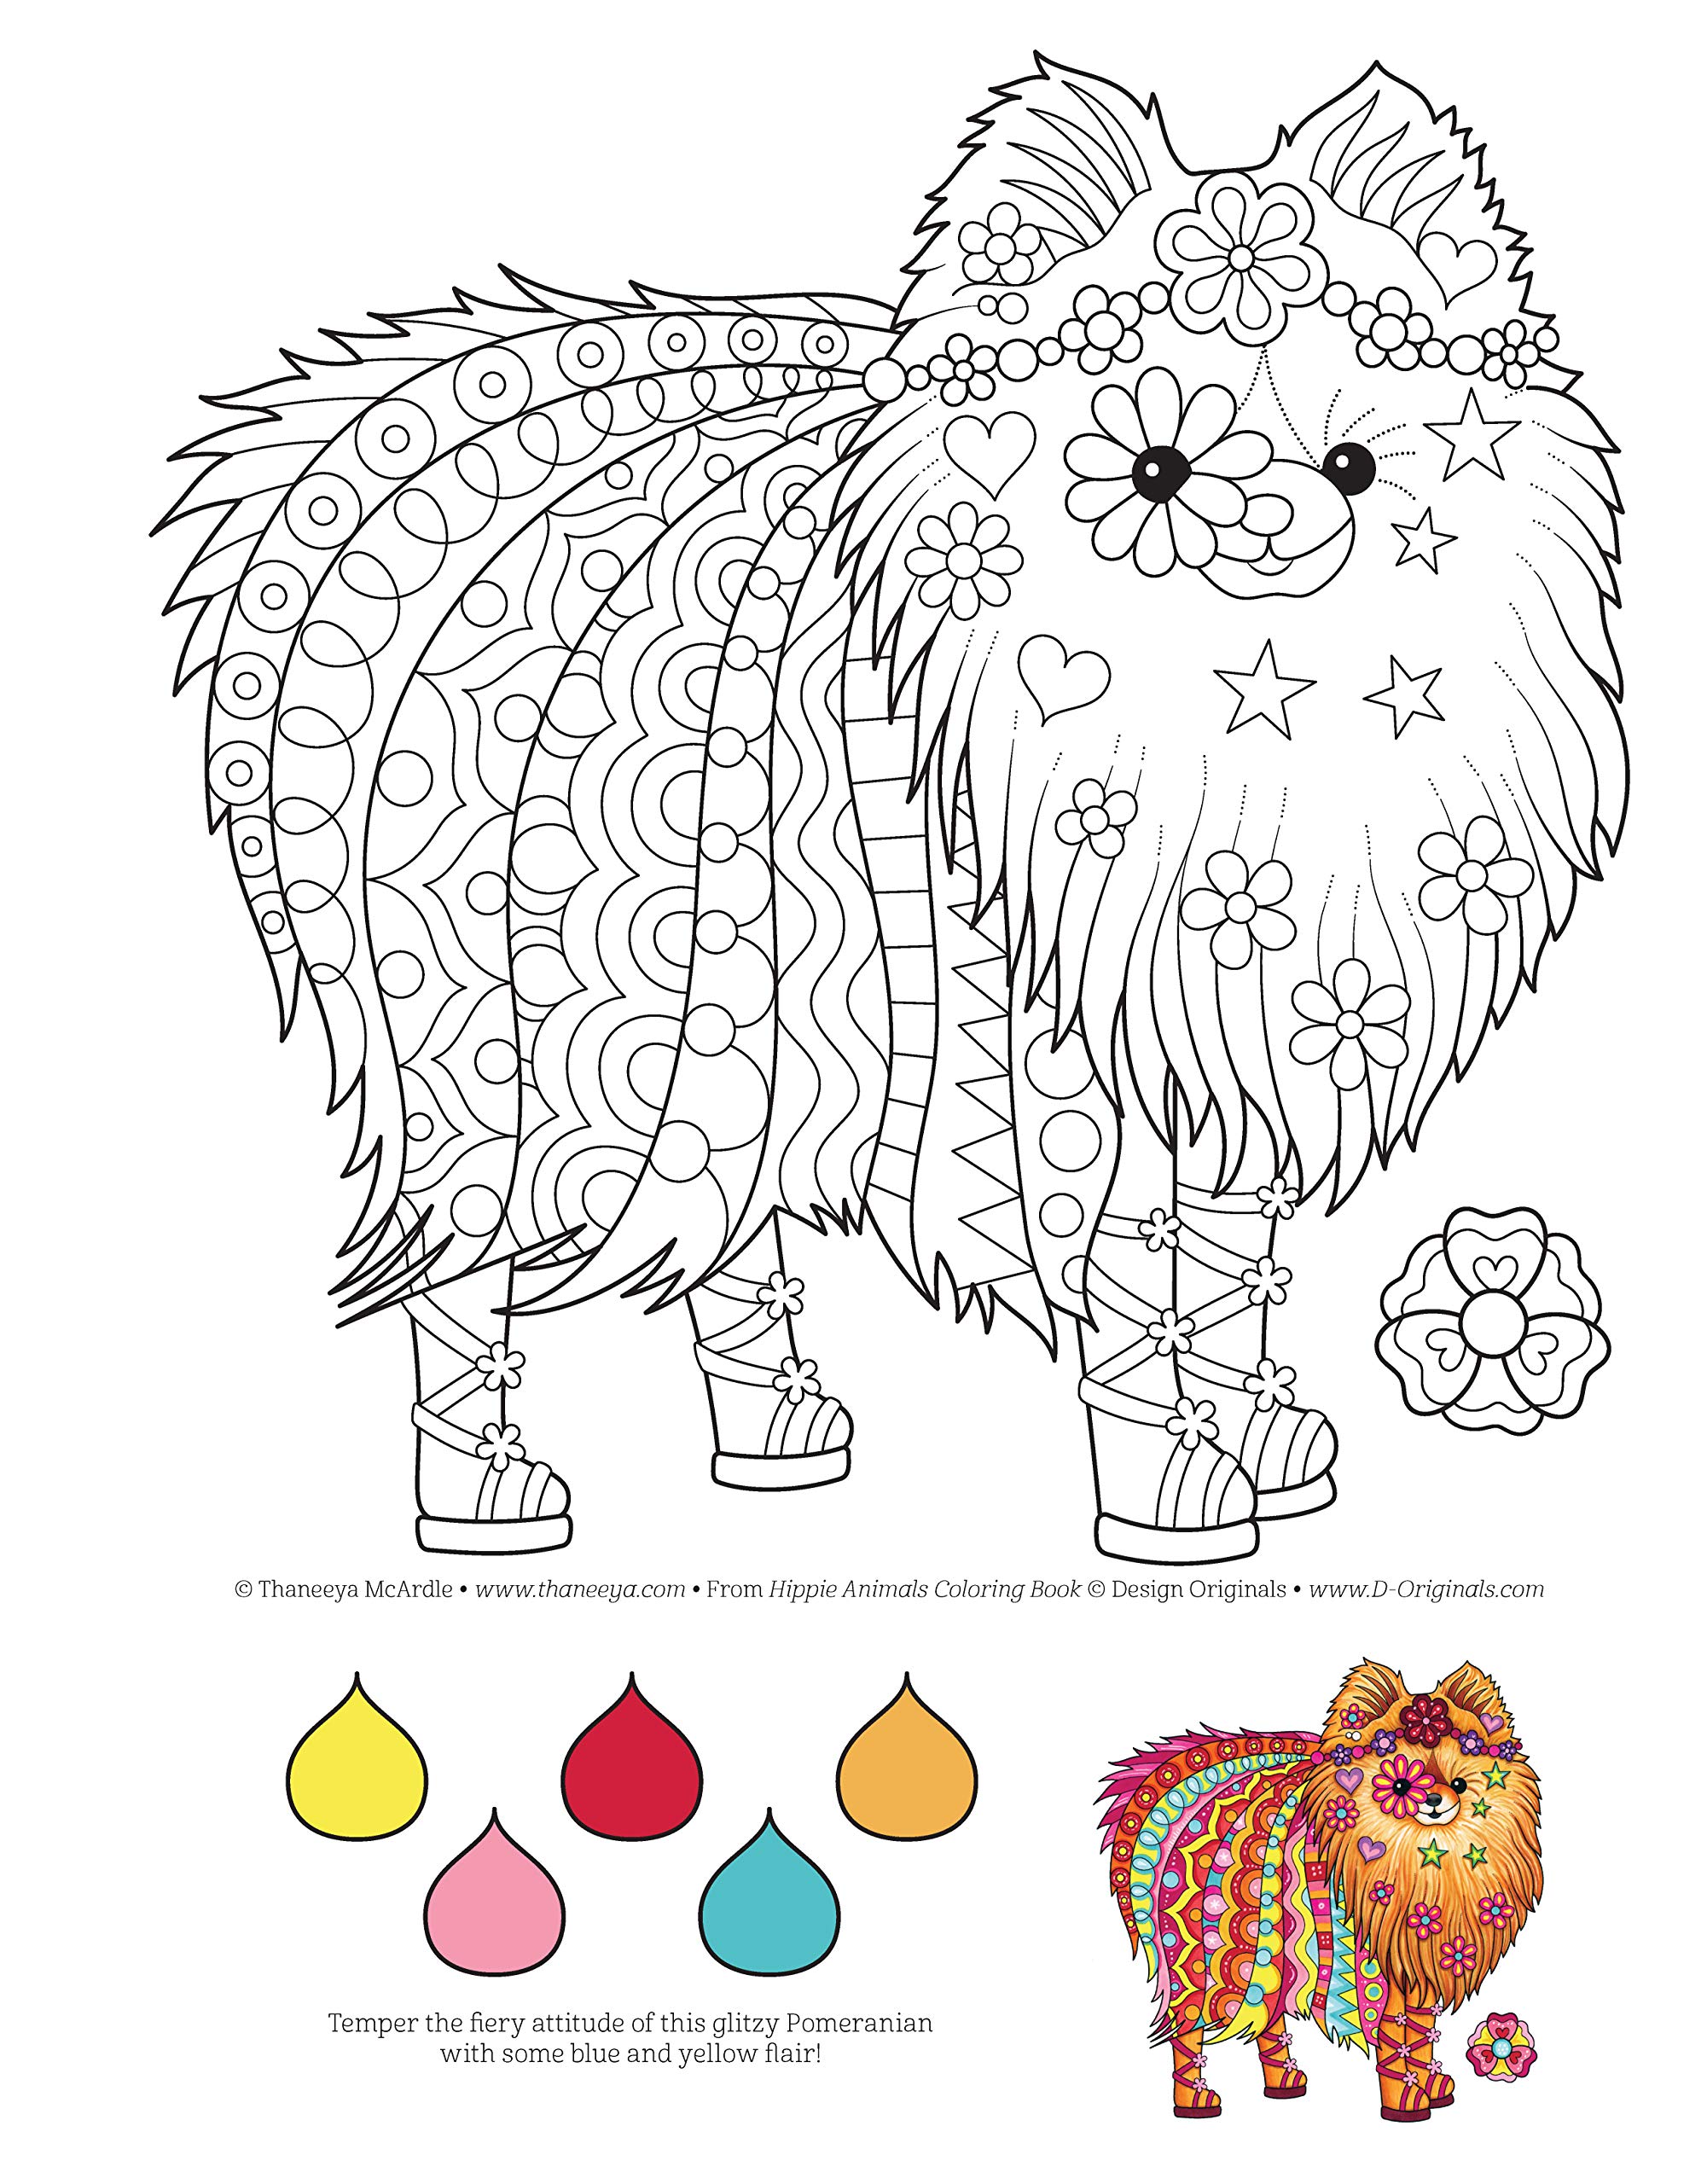 Mua Hippie Animals Coloring Book (Coloring is Fun) (Design Originals) 32  Groovy, Totally Chill Animal Designs from Thaneeya McArdle, on  High-Quality, Extra-Thick Perforated Pages Resist Bleed-Through trên Amazon  Mỹ chính hãng 2023 |